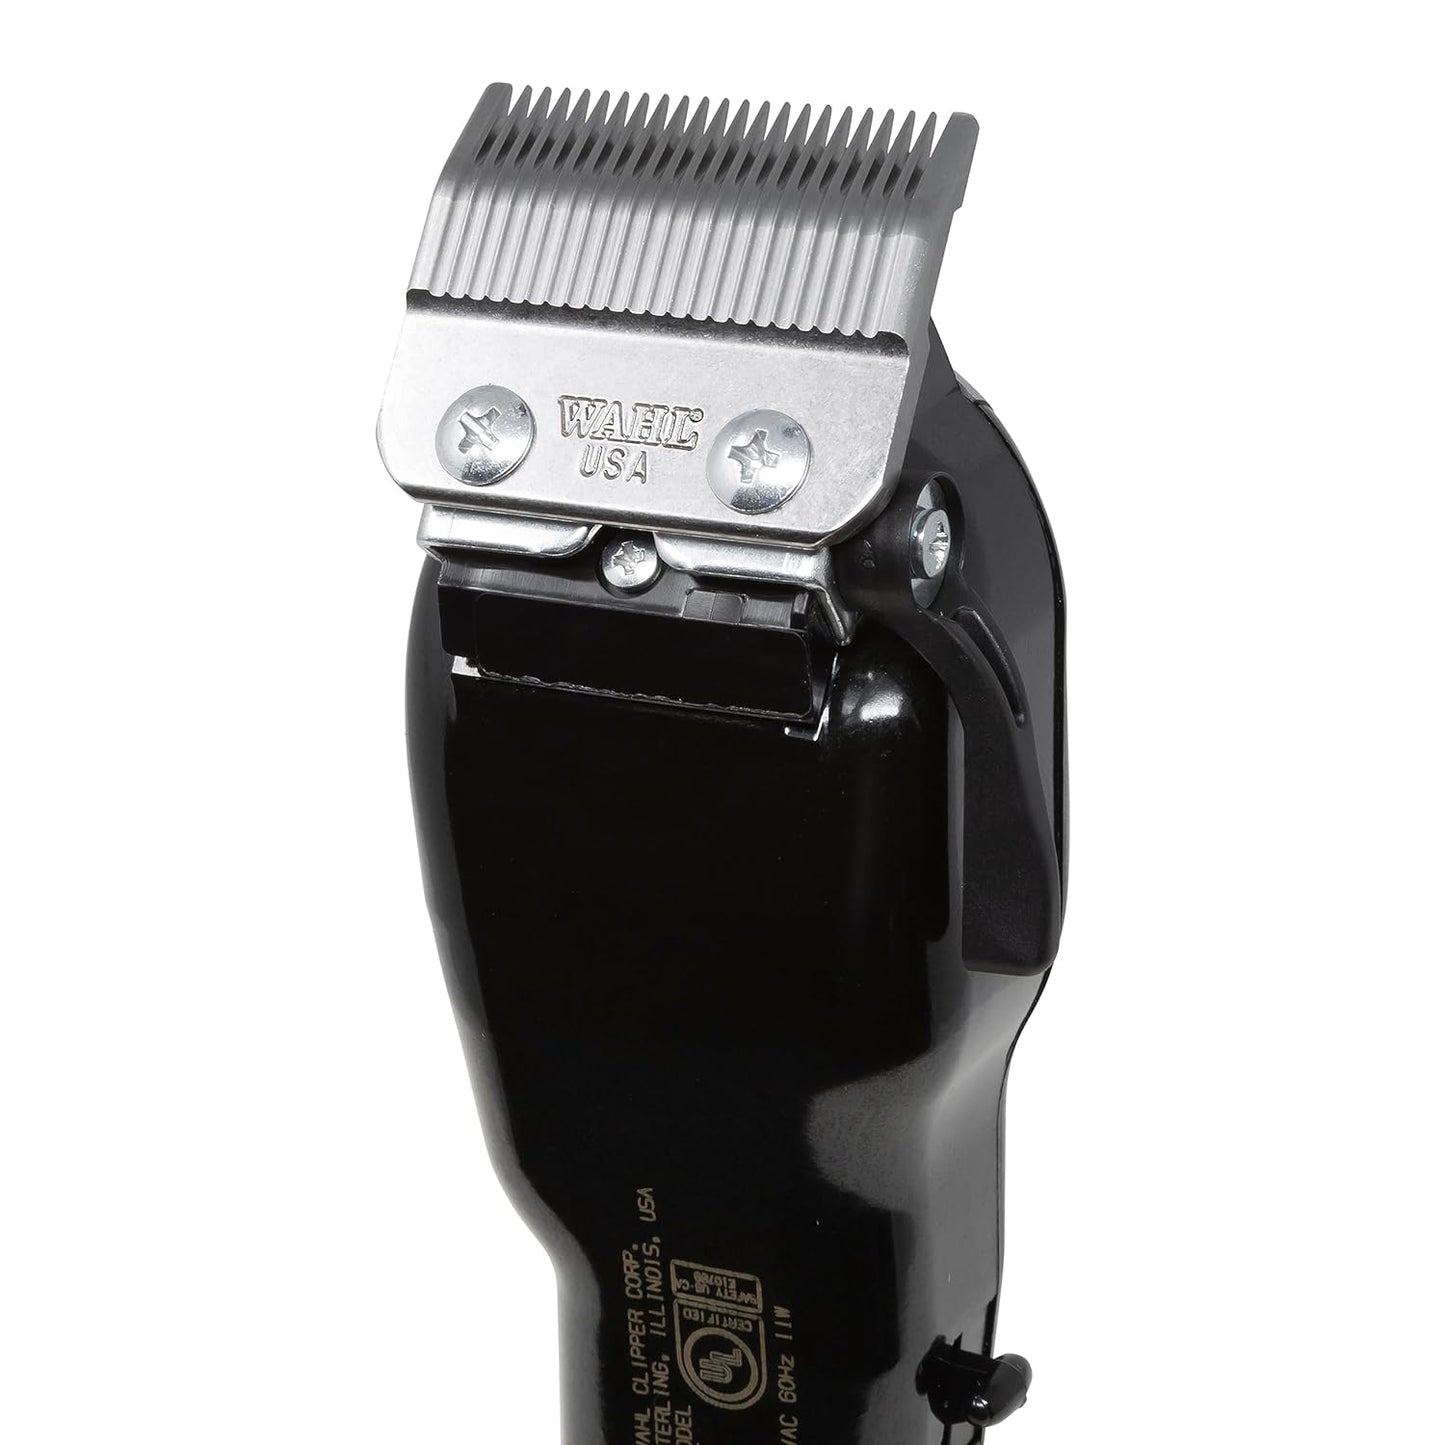 Wahl Professional Icon Clipper - Full Size With Ultra Powerful V9000 Motor for Professional Barbers and Stylists - Model 8490-900, Black